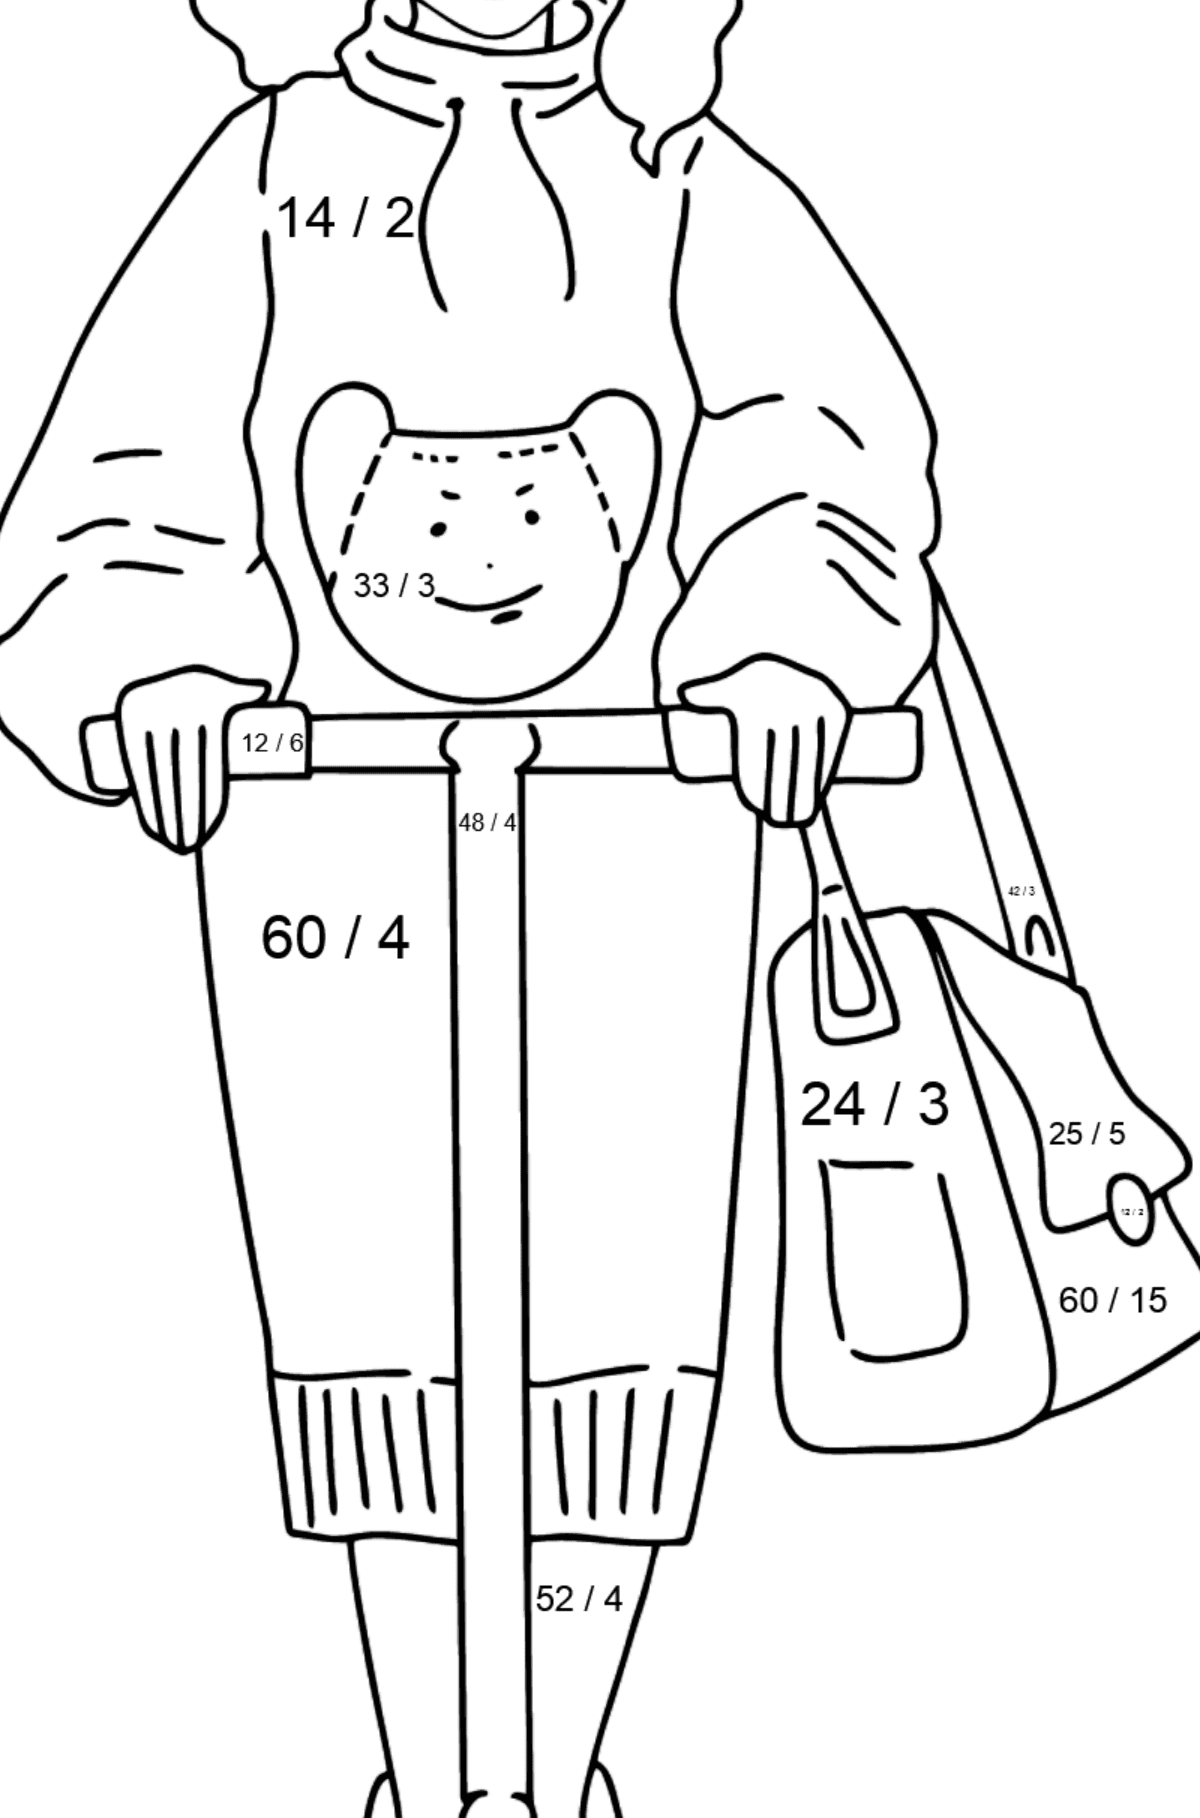 Barbie Doll Riding a Scooter coloring page - Math Coloring - Division for Kids